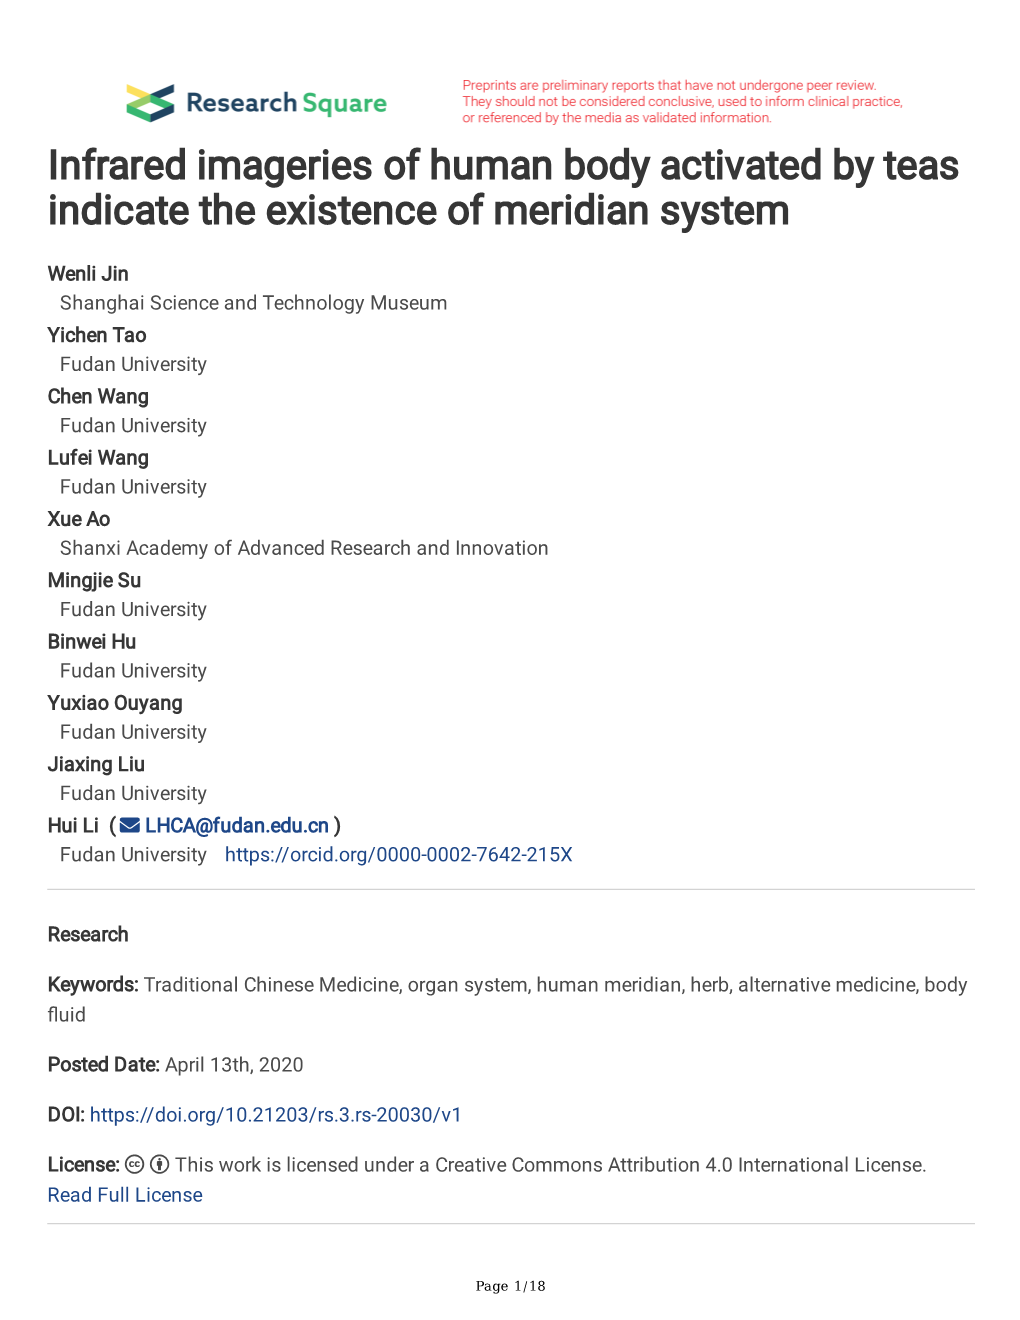 Infrared Imageries of Human Body Activated by Teas Indicate the Existence of Meridian System